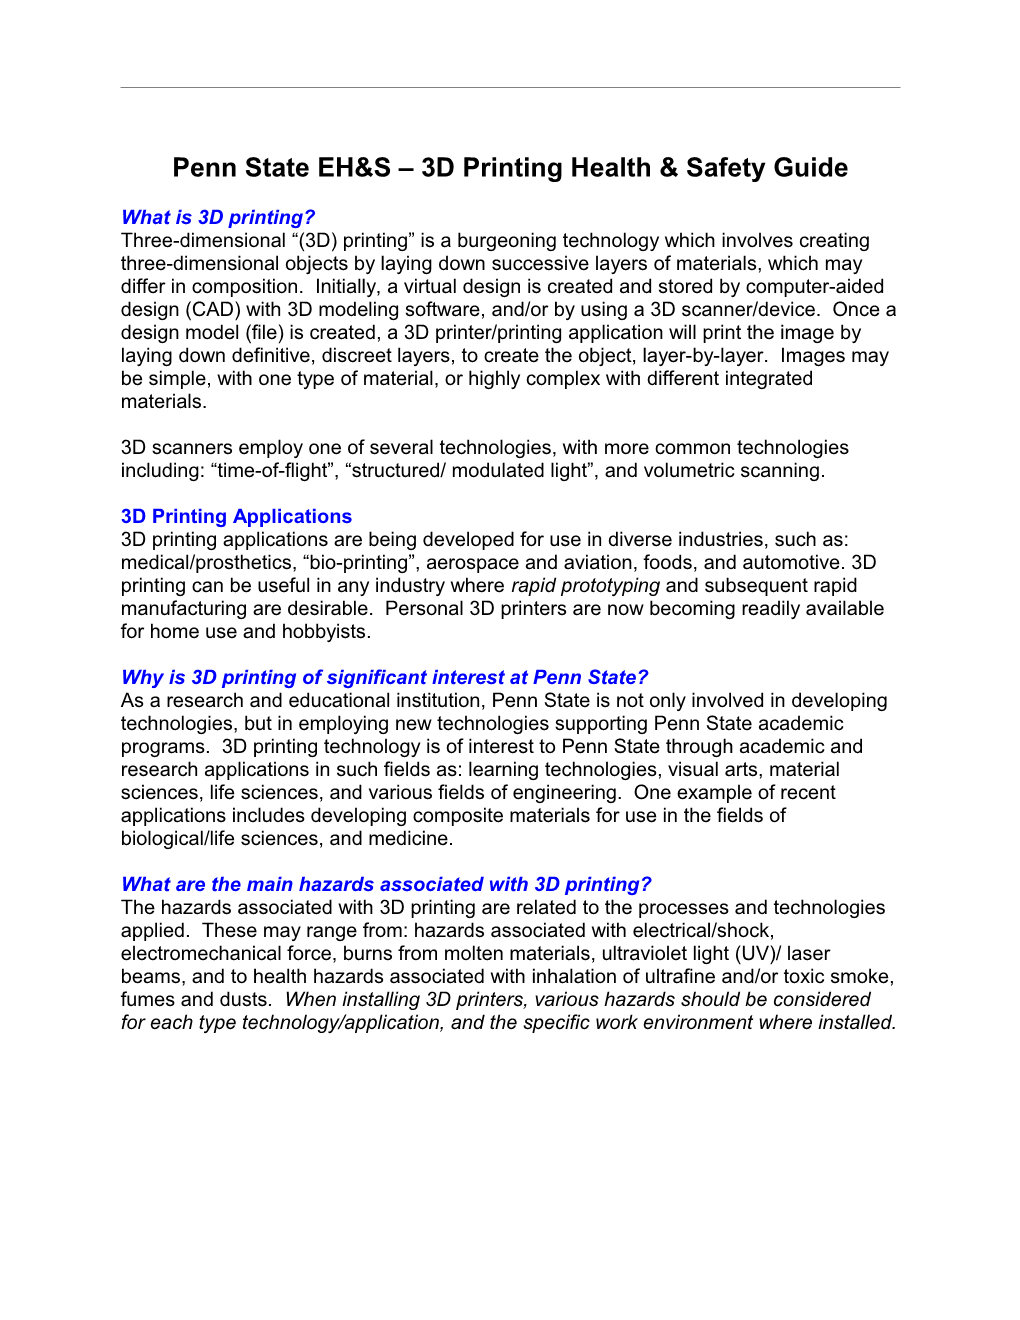 Penn State EHS 3D Printinghealth & Safety Guide